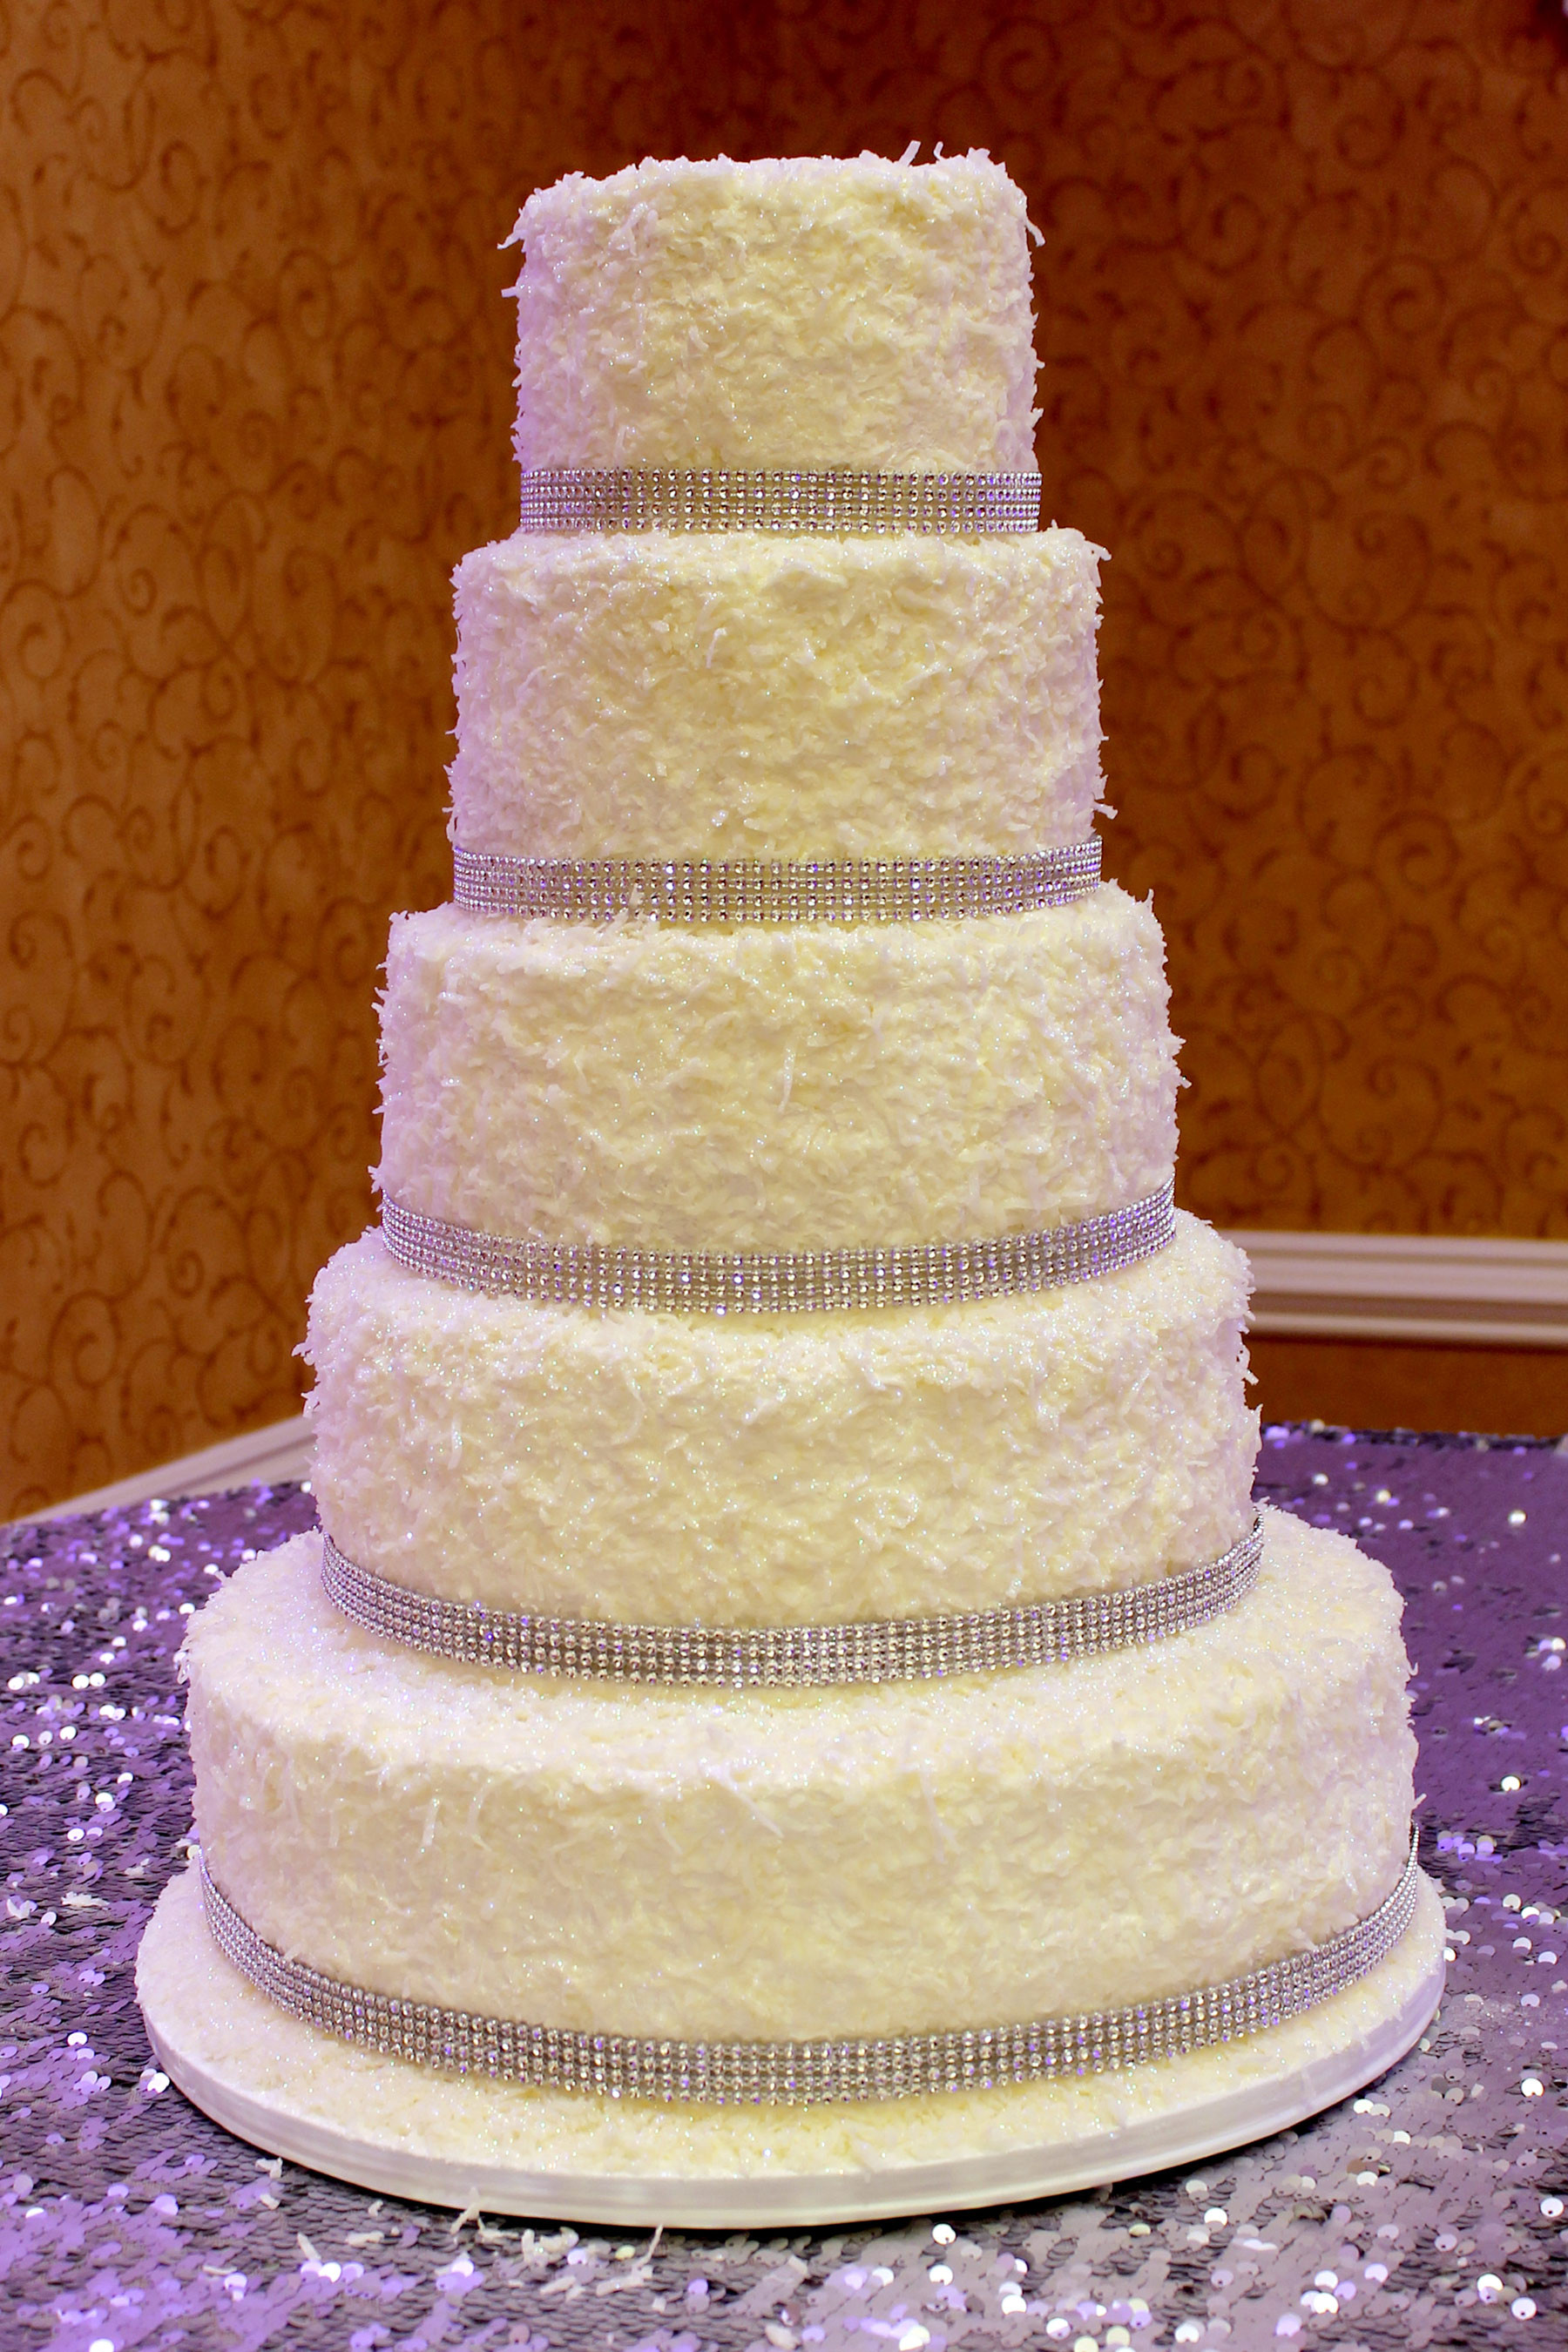 Coconut Wedding Cake
 coconut wedding cake Archives Patty s Cakes and Desserts